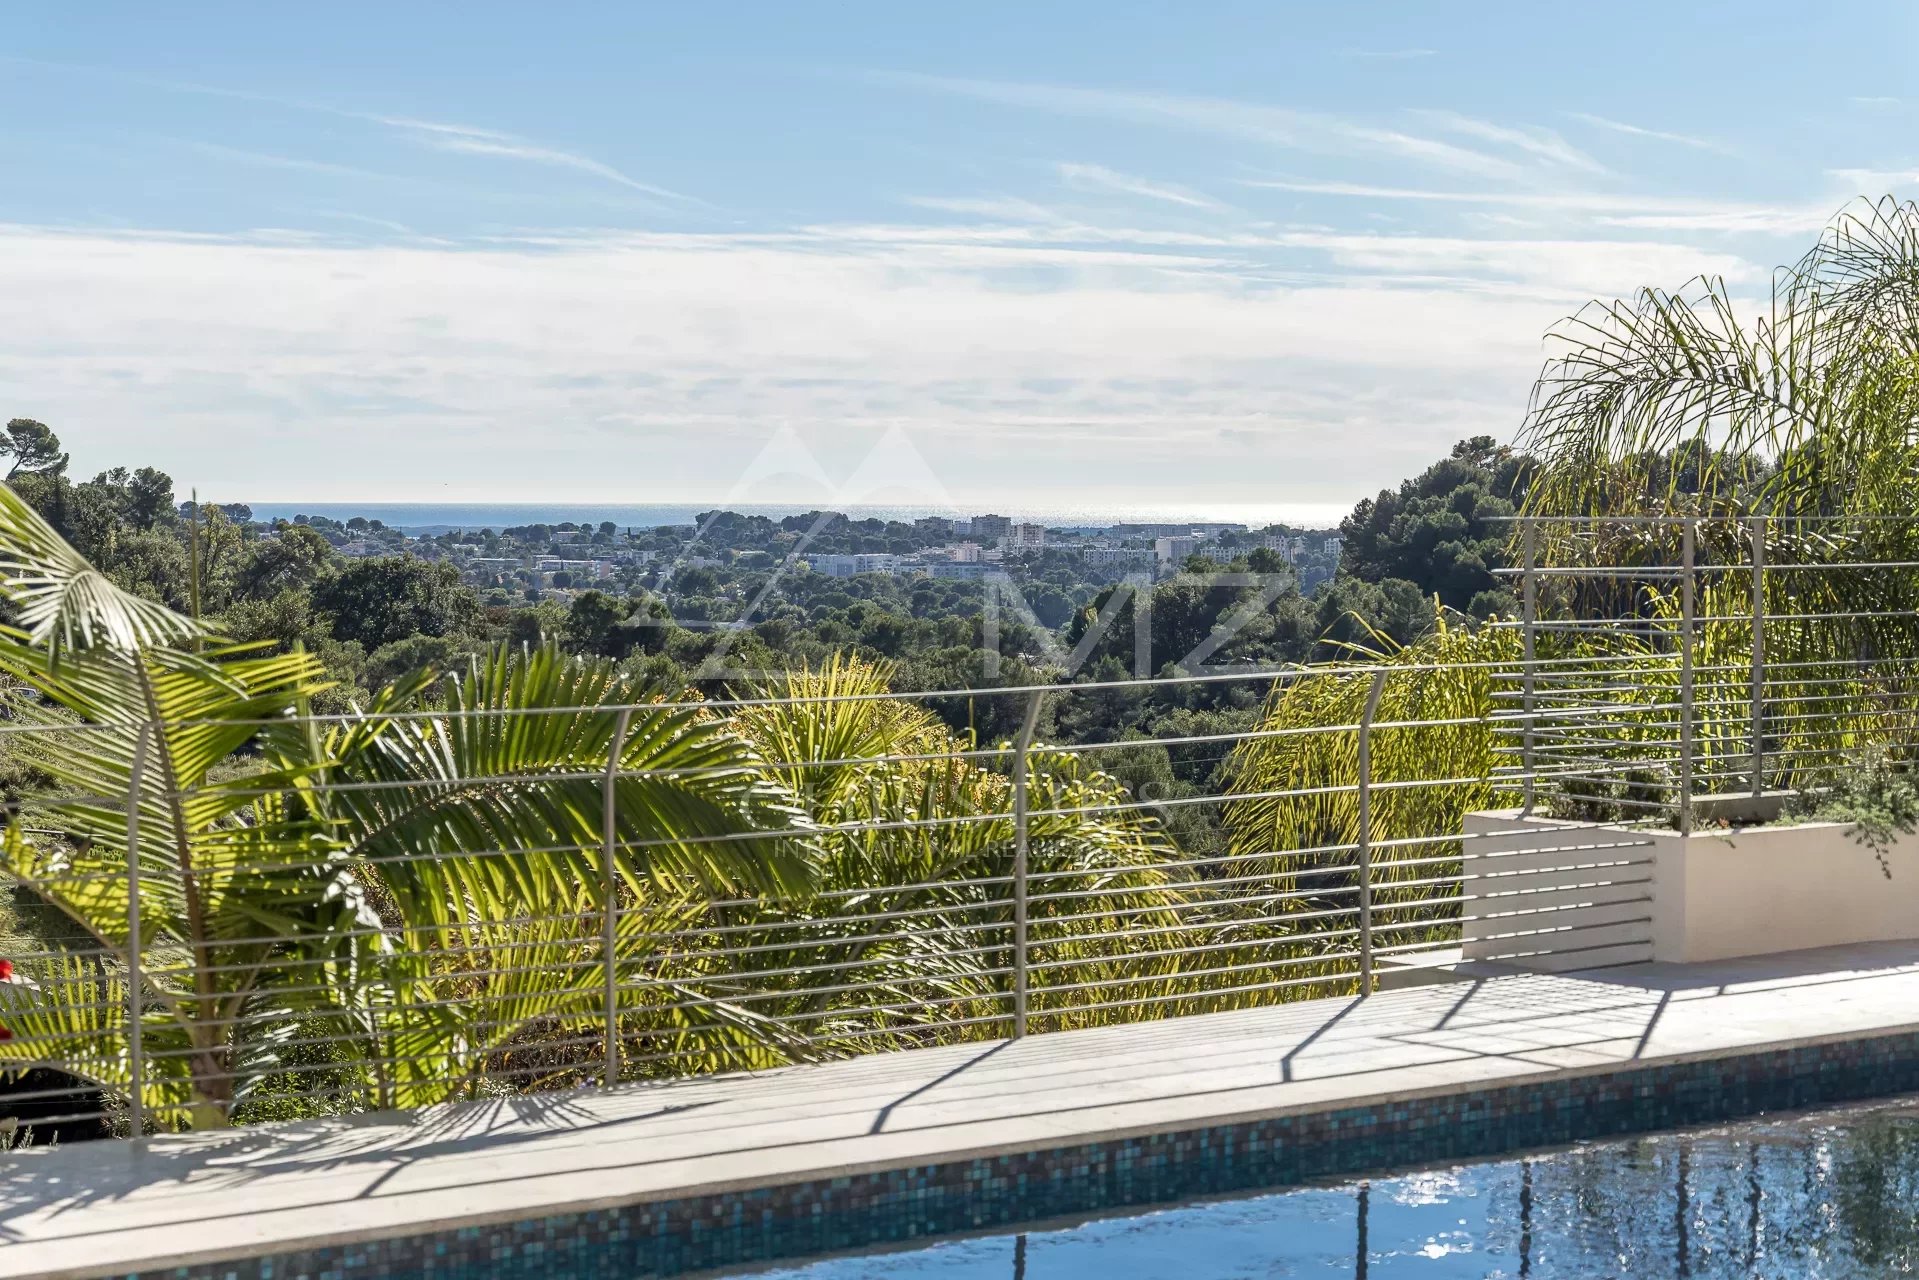 Mougins - Residential area, recent villa with open view on the hills and the sea